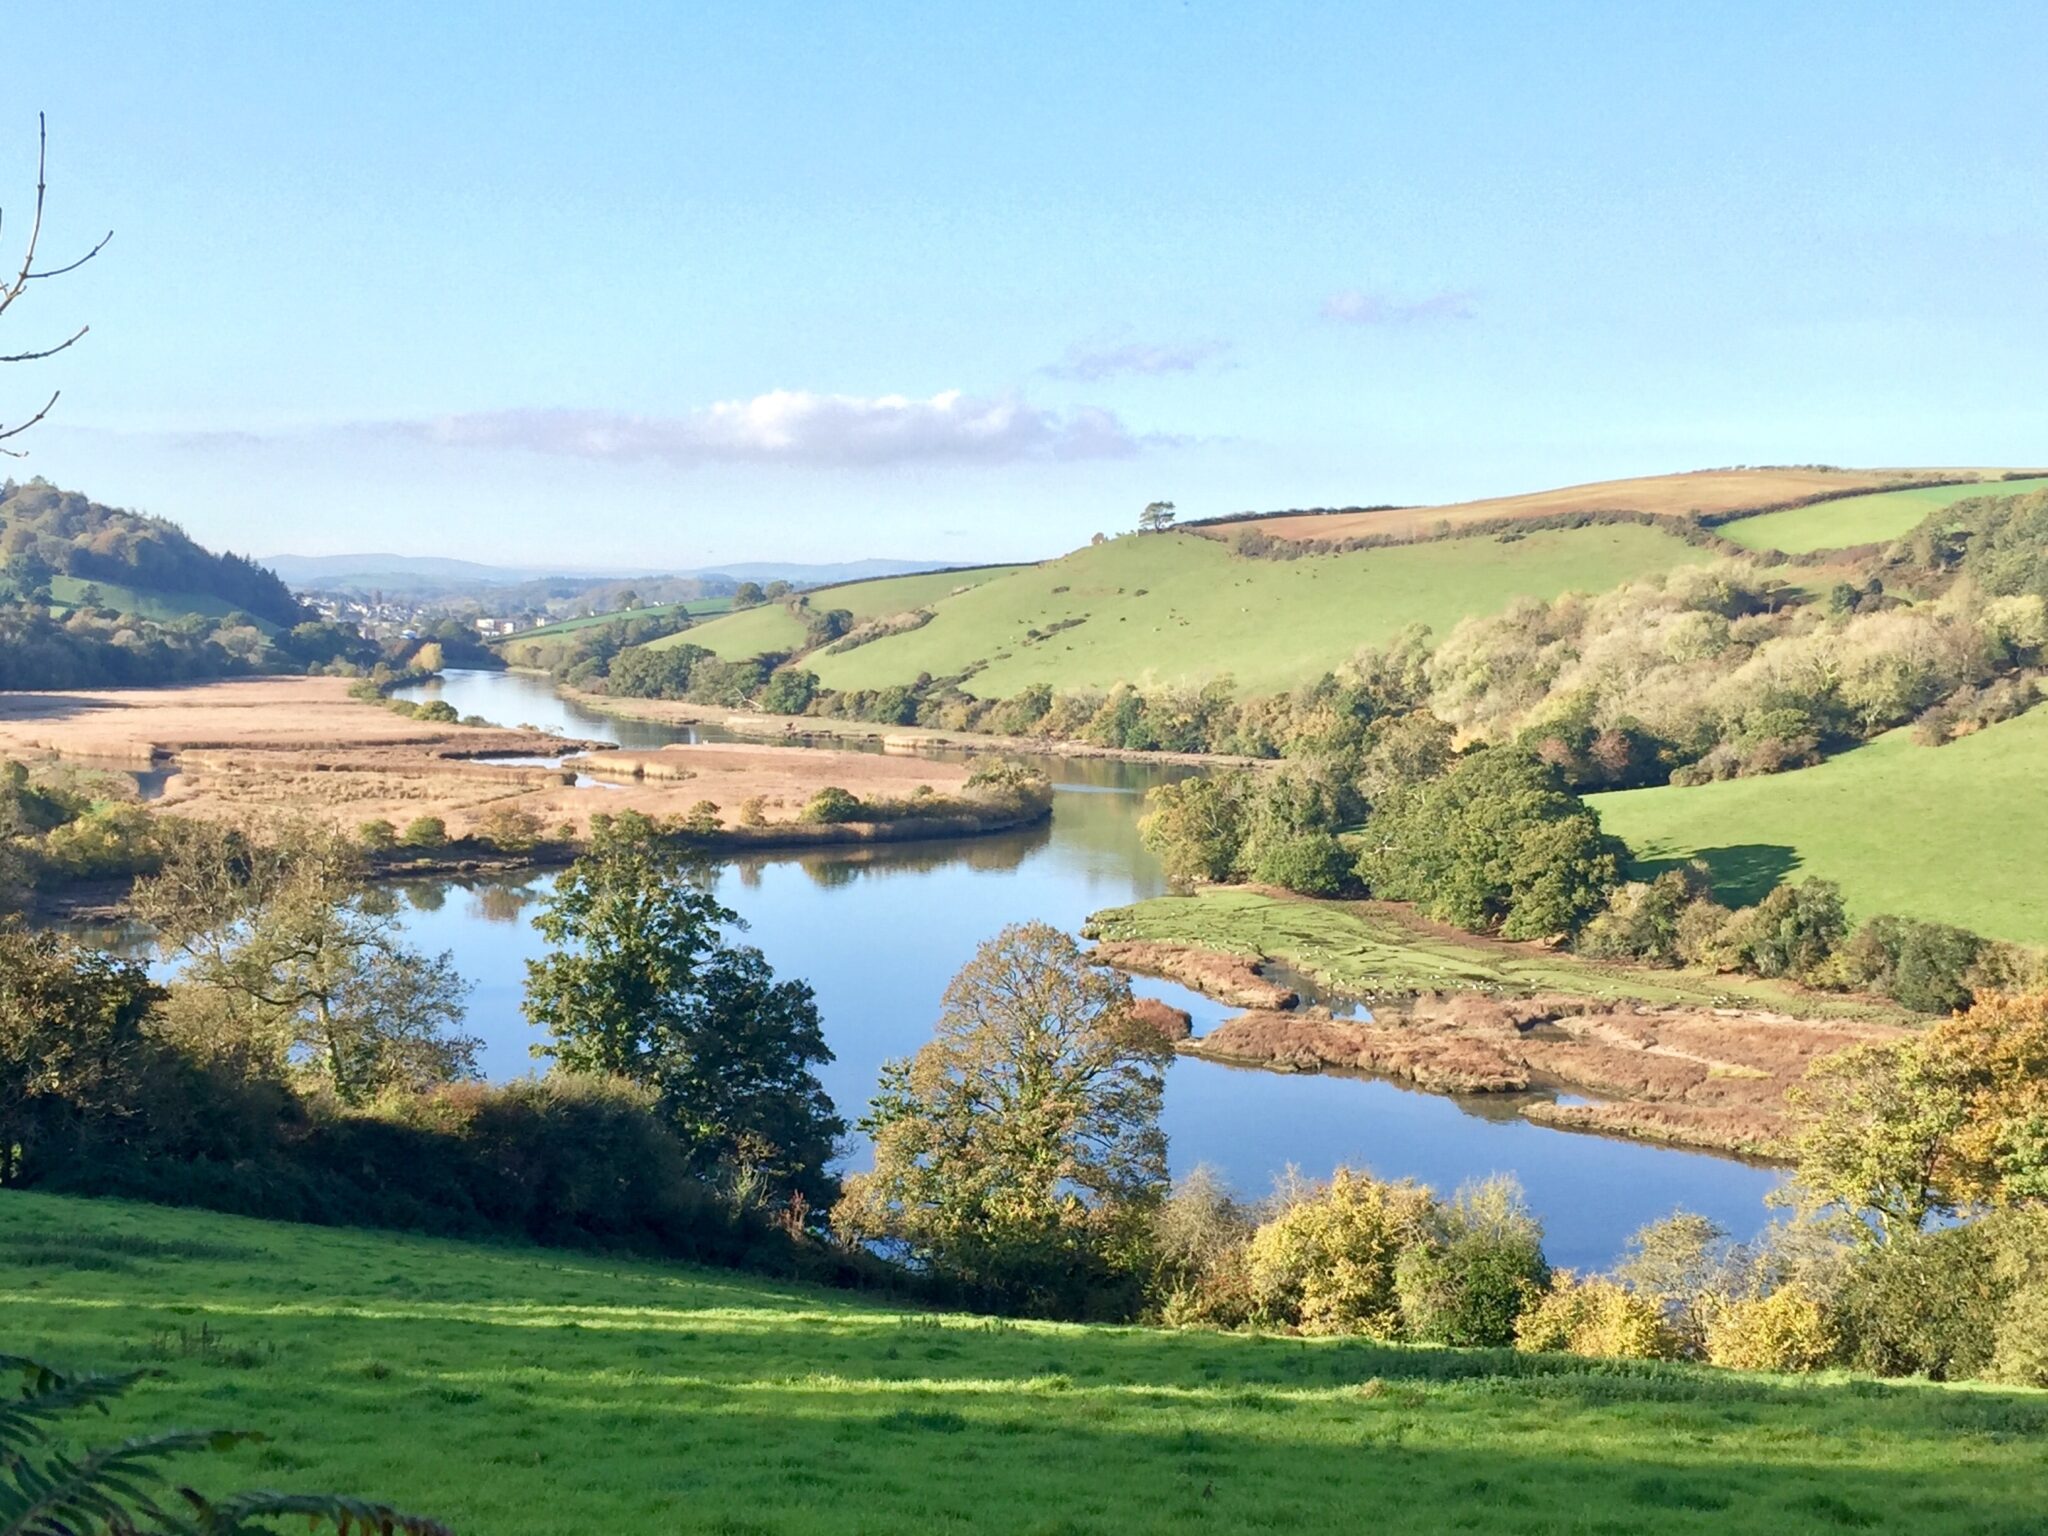 The River Dart and surrounding countryside in the sunshine